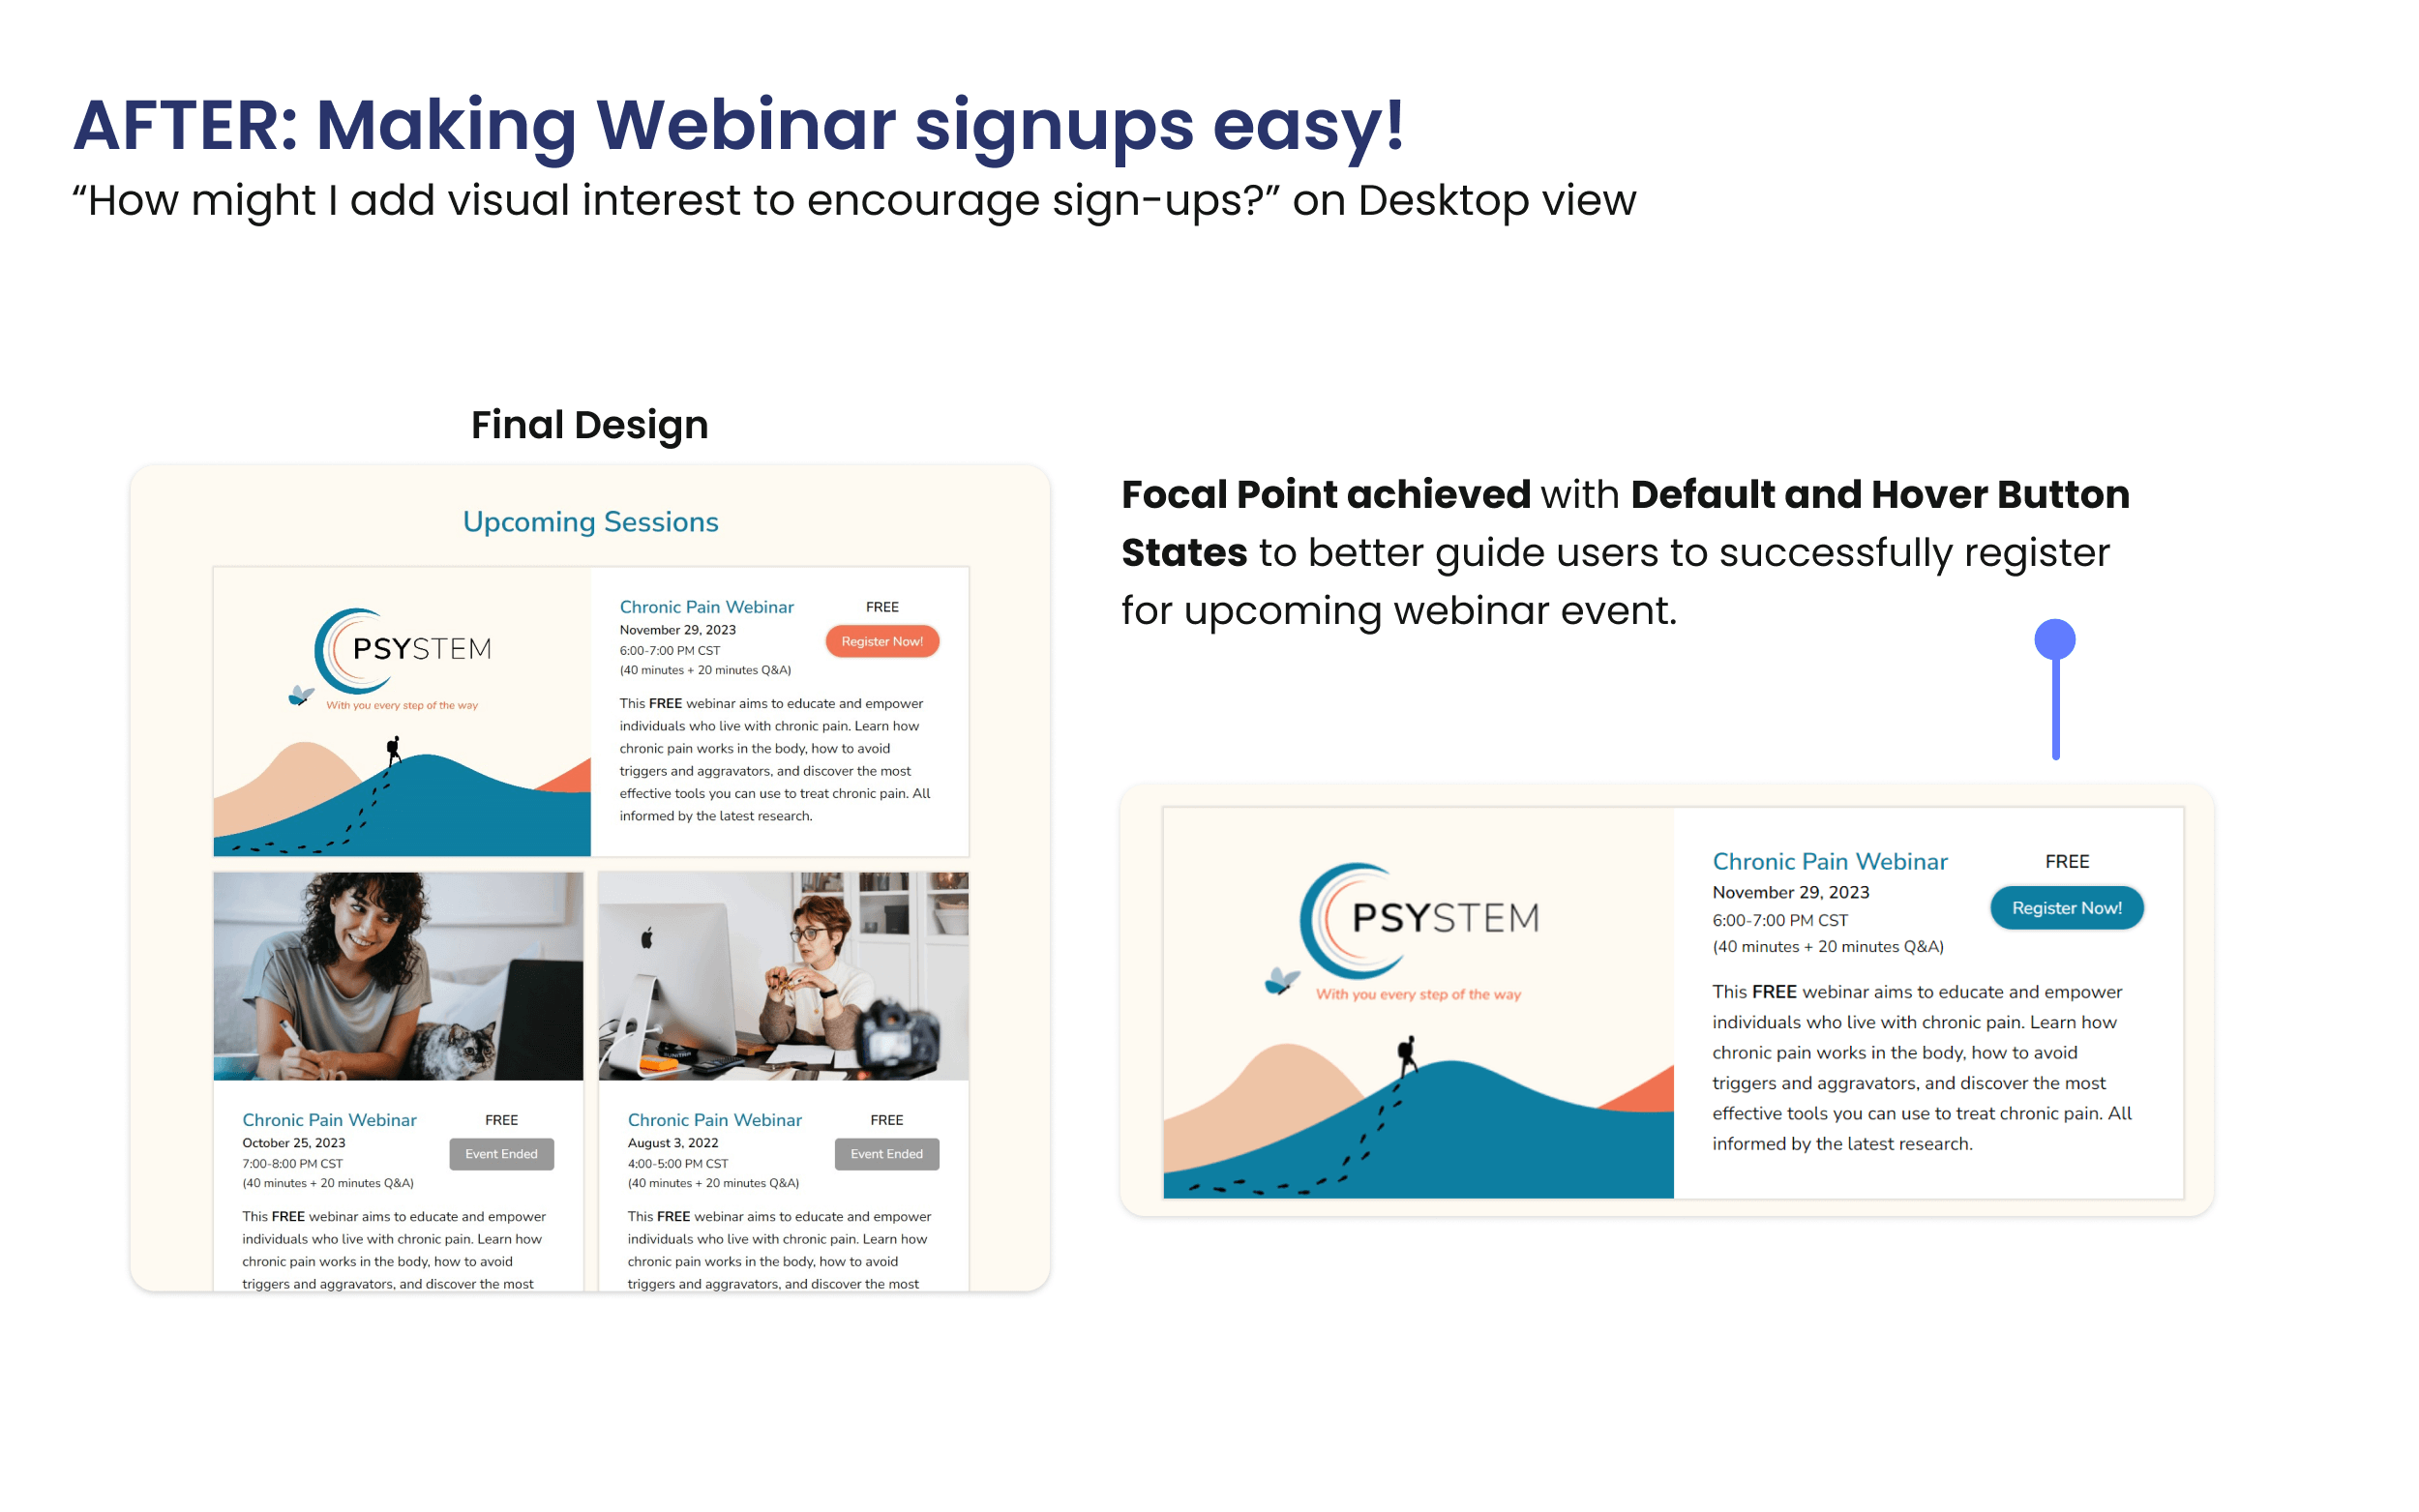 Mockup of the Upcoming Sessions section of the Webinar page, showcasing two button states